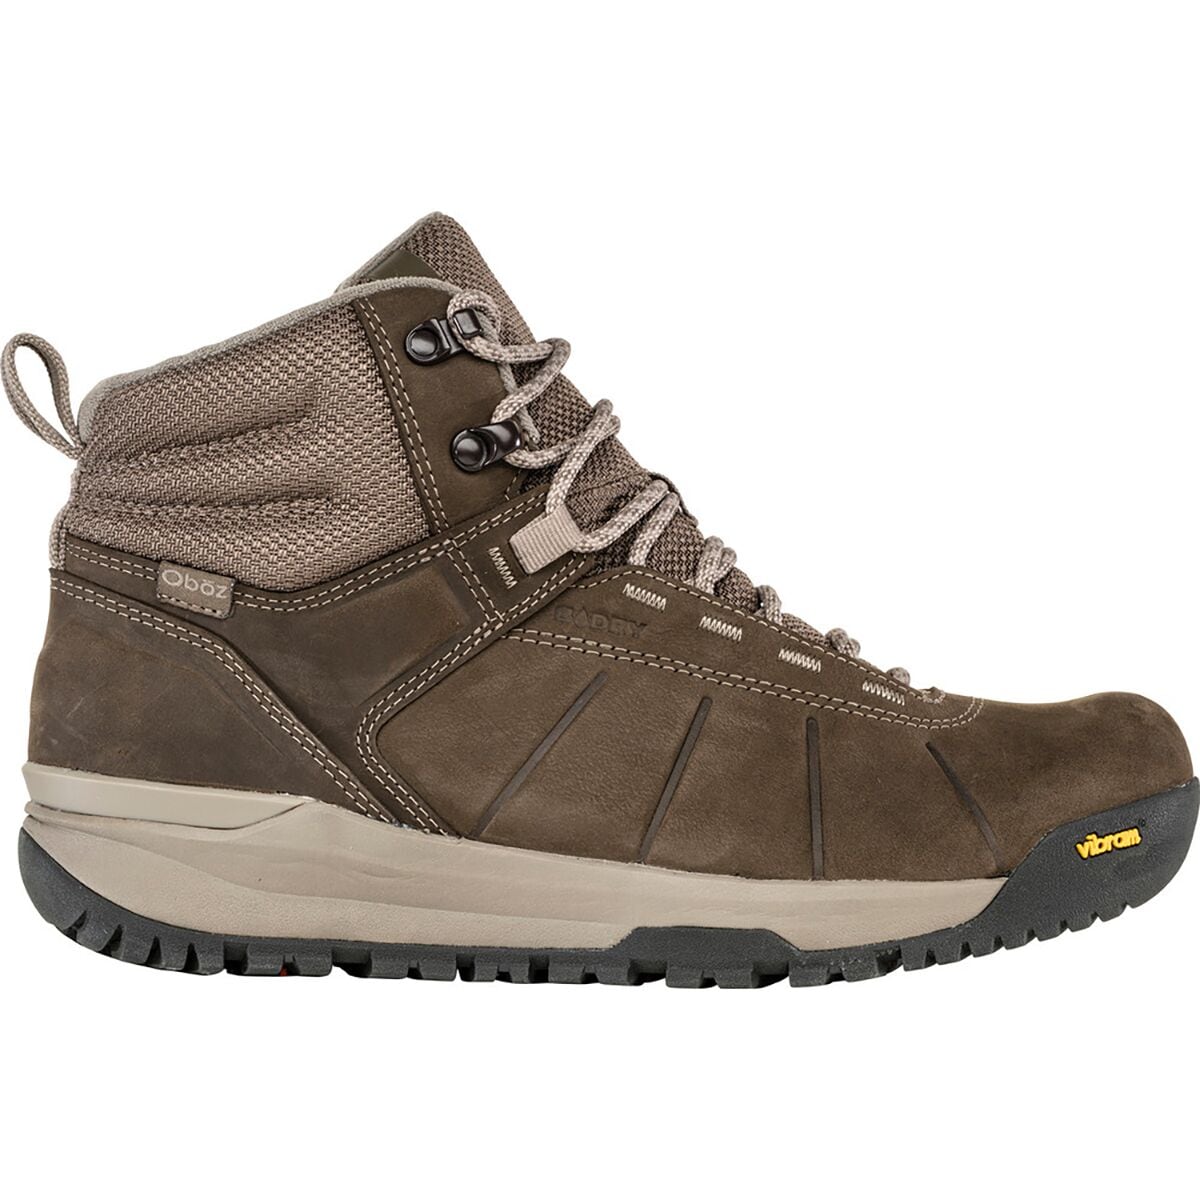 Andesite Mid Insulated B-DRY Boot - Men